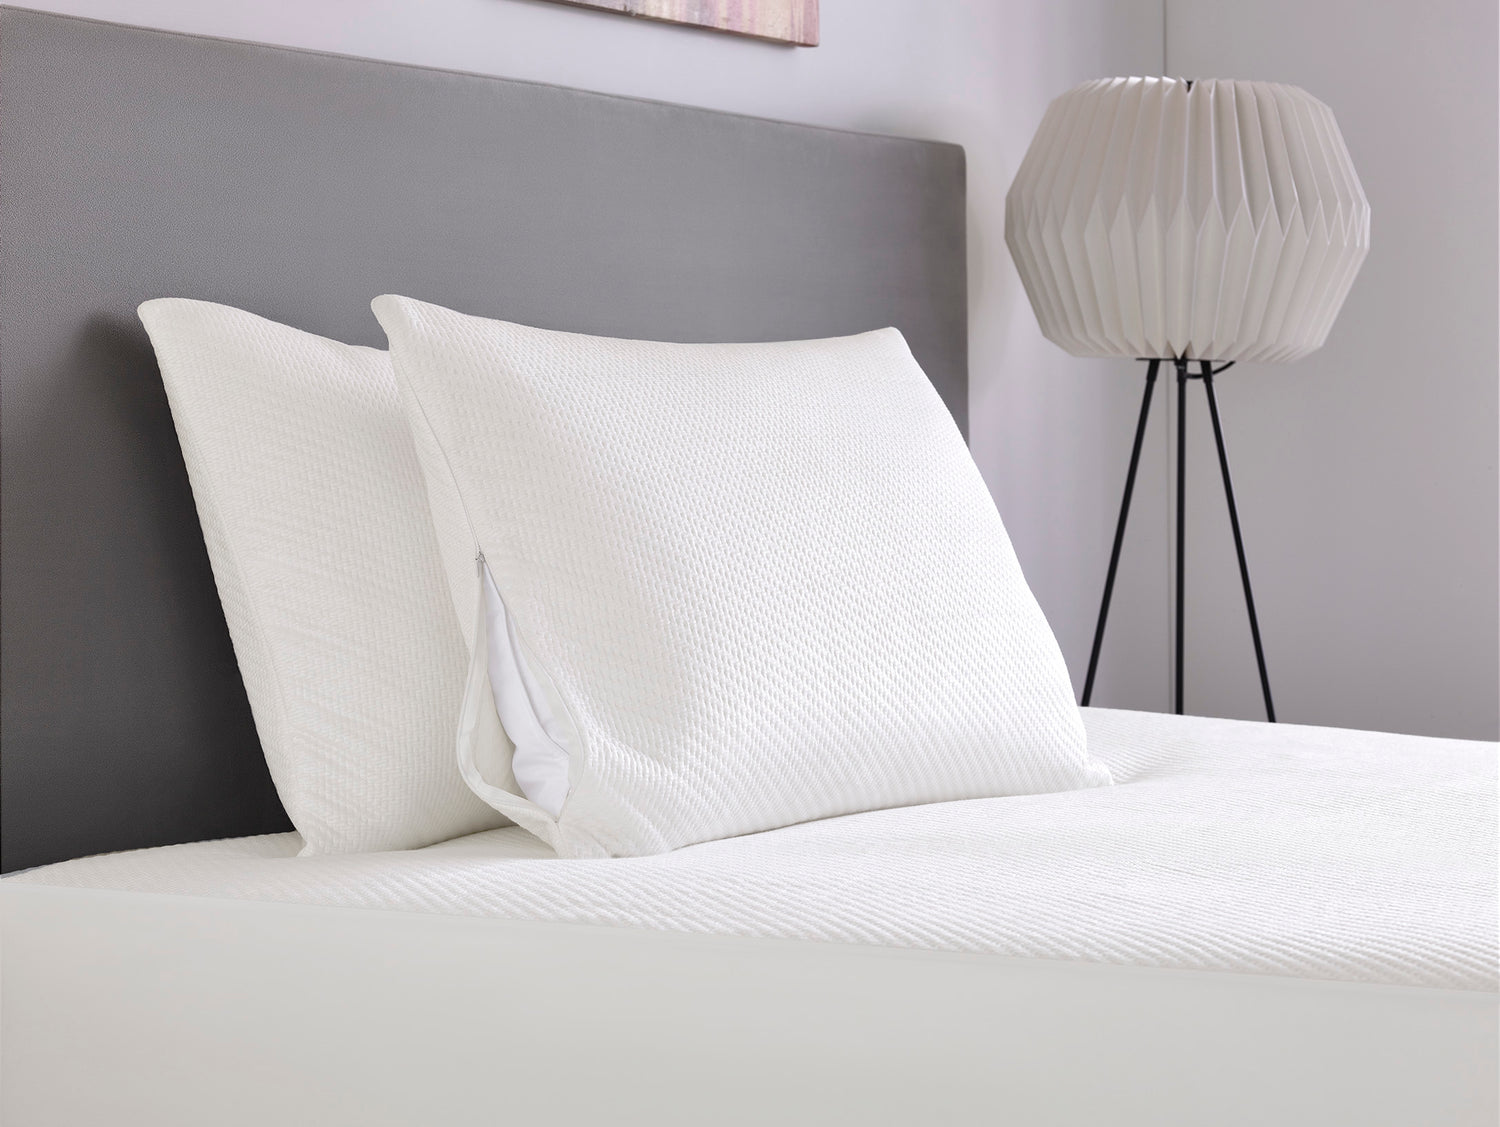 Unleash the Power of Dryseal™ Technology: Introducing SmartGuard Mattress and Pillow Protectors by Sleeptone